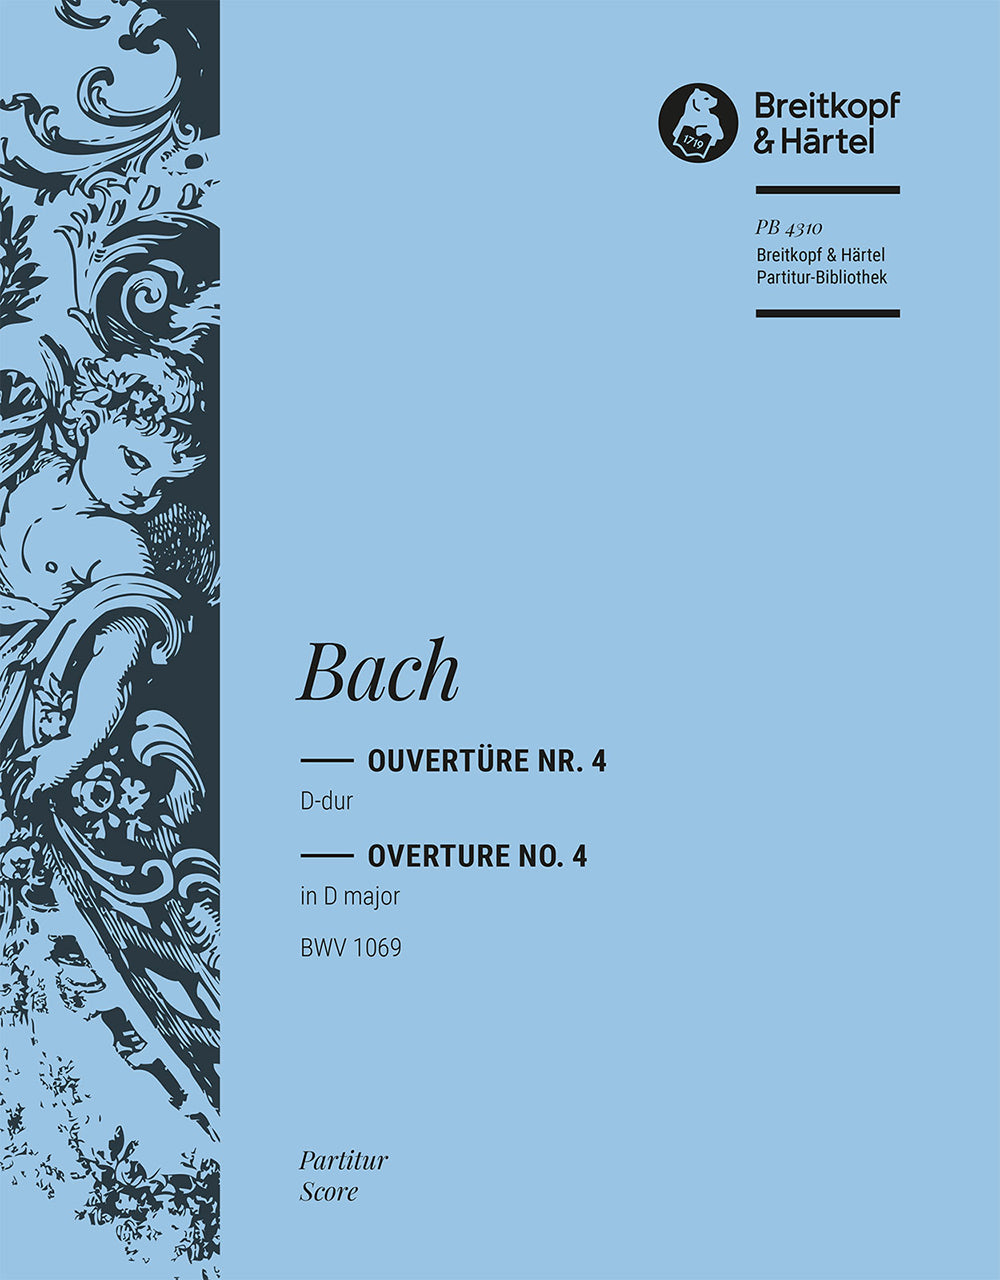 Bach Overture Suite No 4 in D major BWV 1069 Full Score